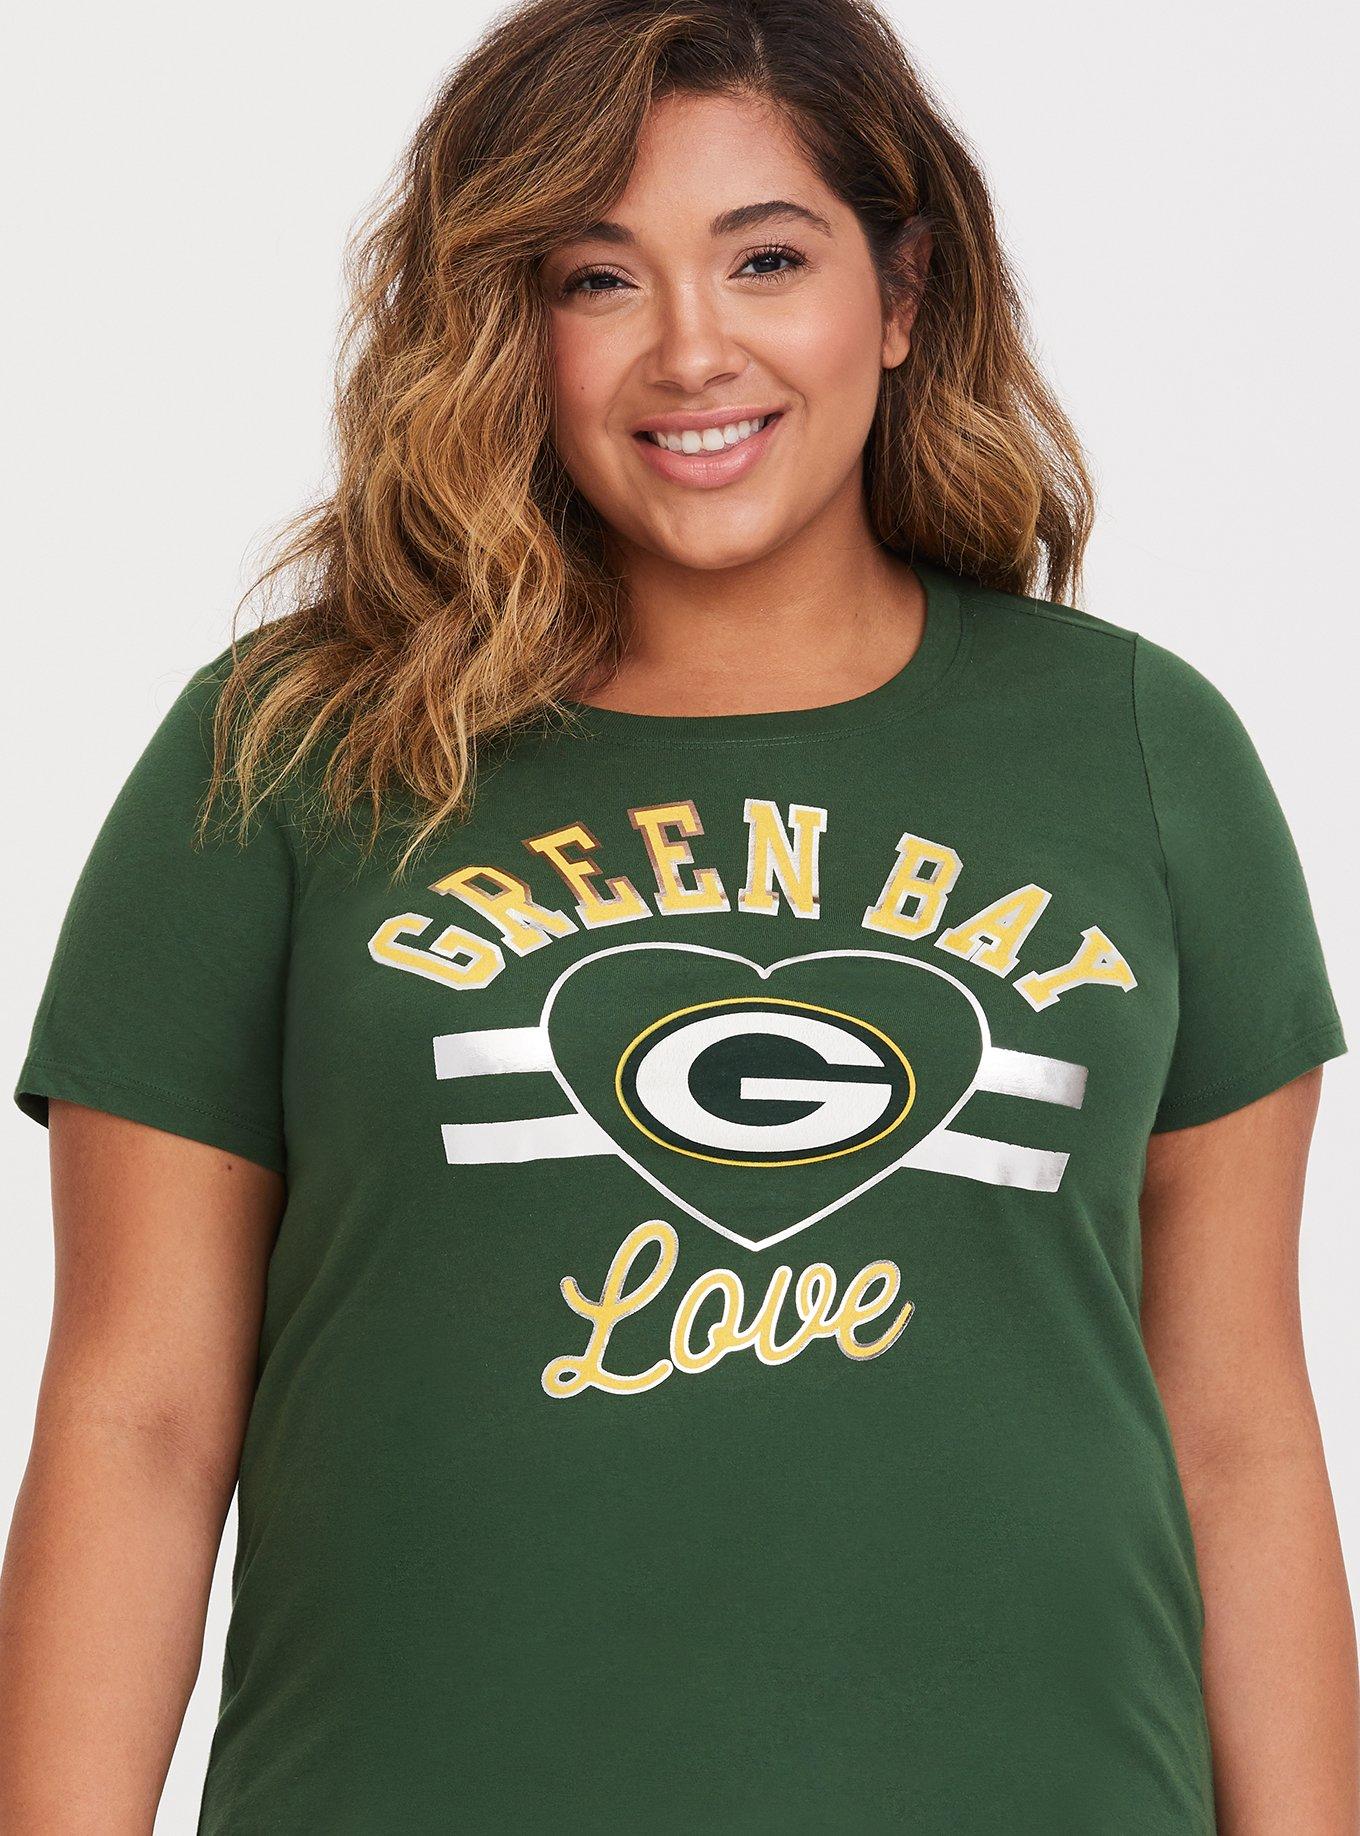 NWT Torrid Plus Size 0 Large CLASSIC FIT FOOTBALL TEE - GREEN BAY PACKERS  GREEN